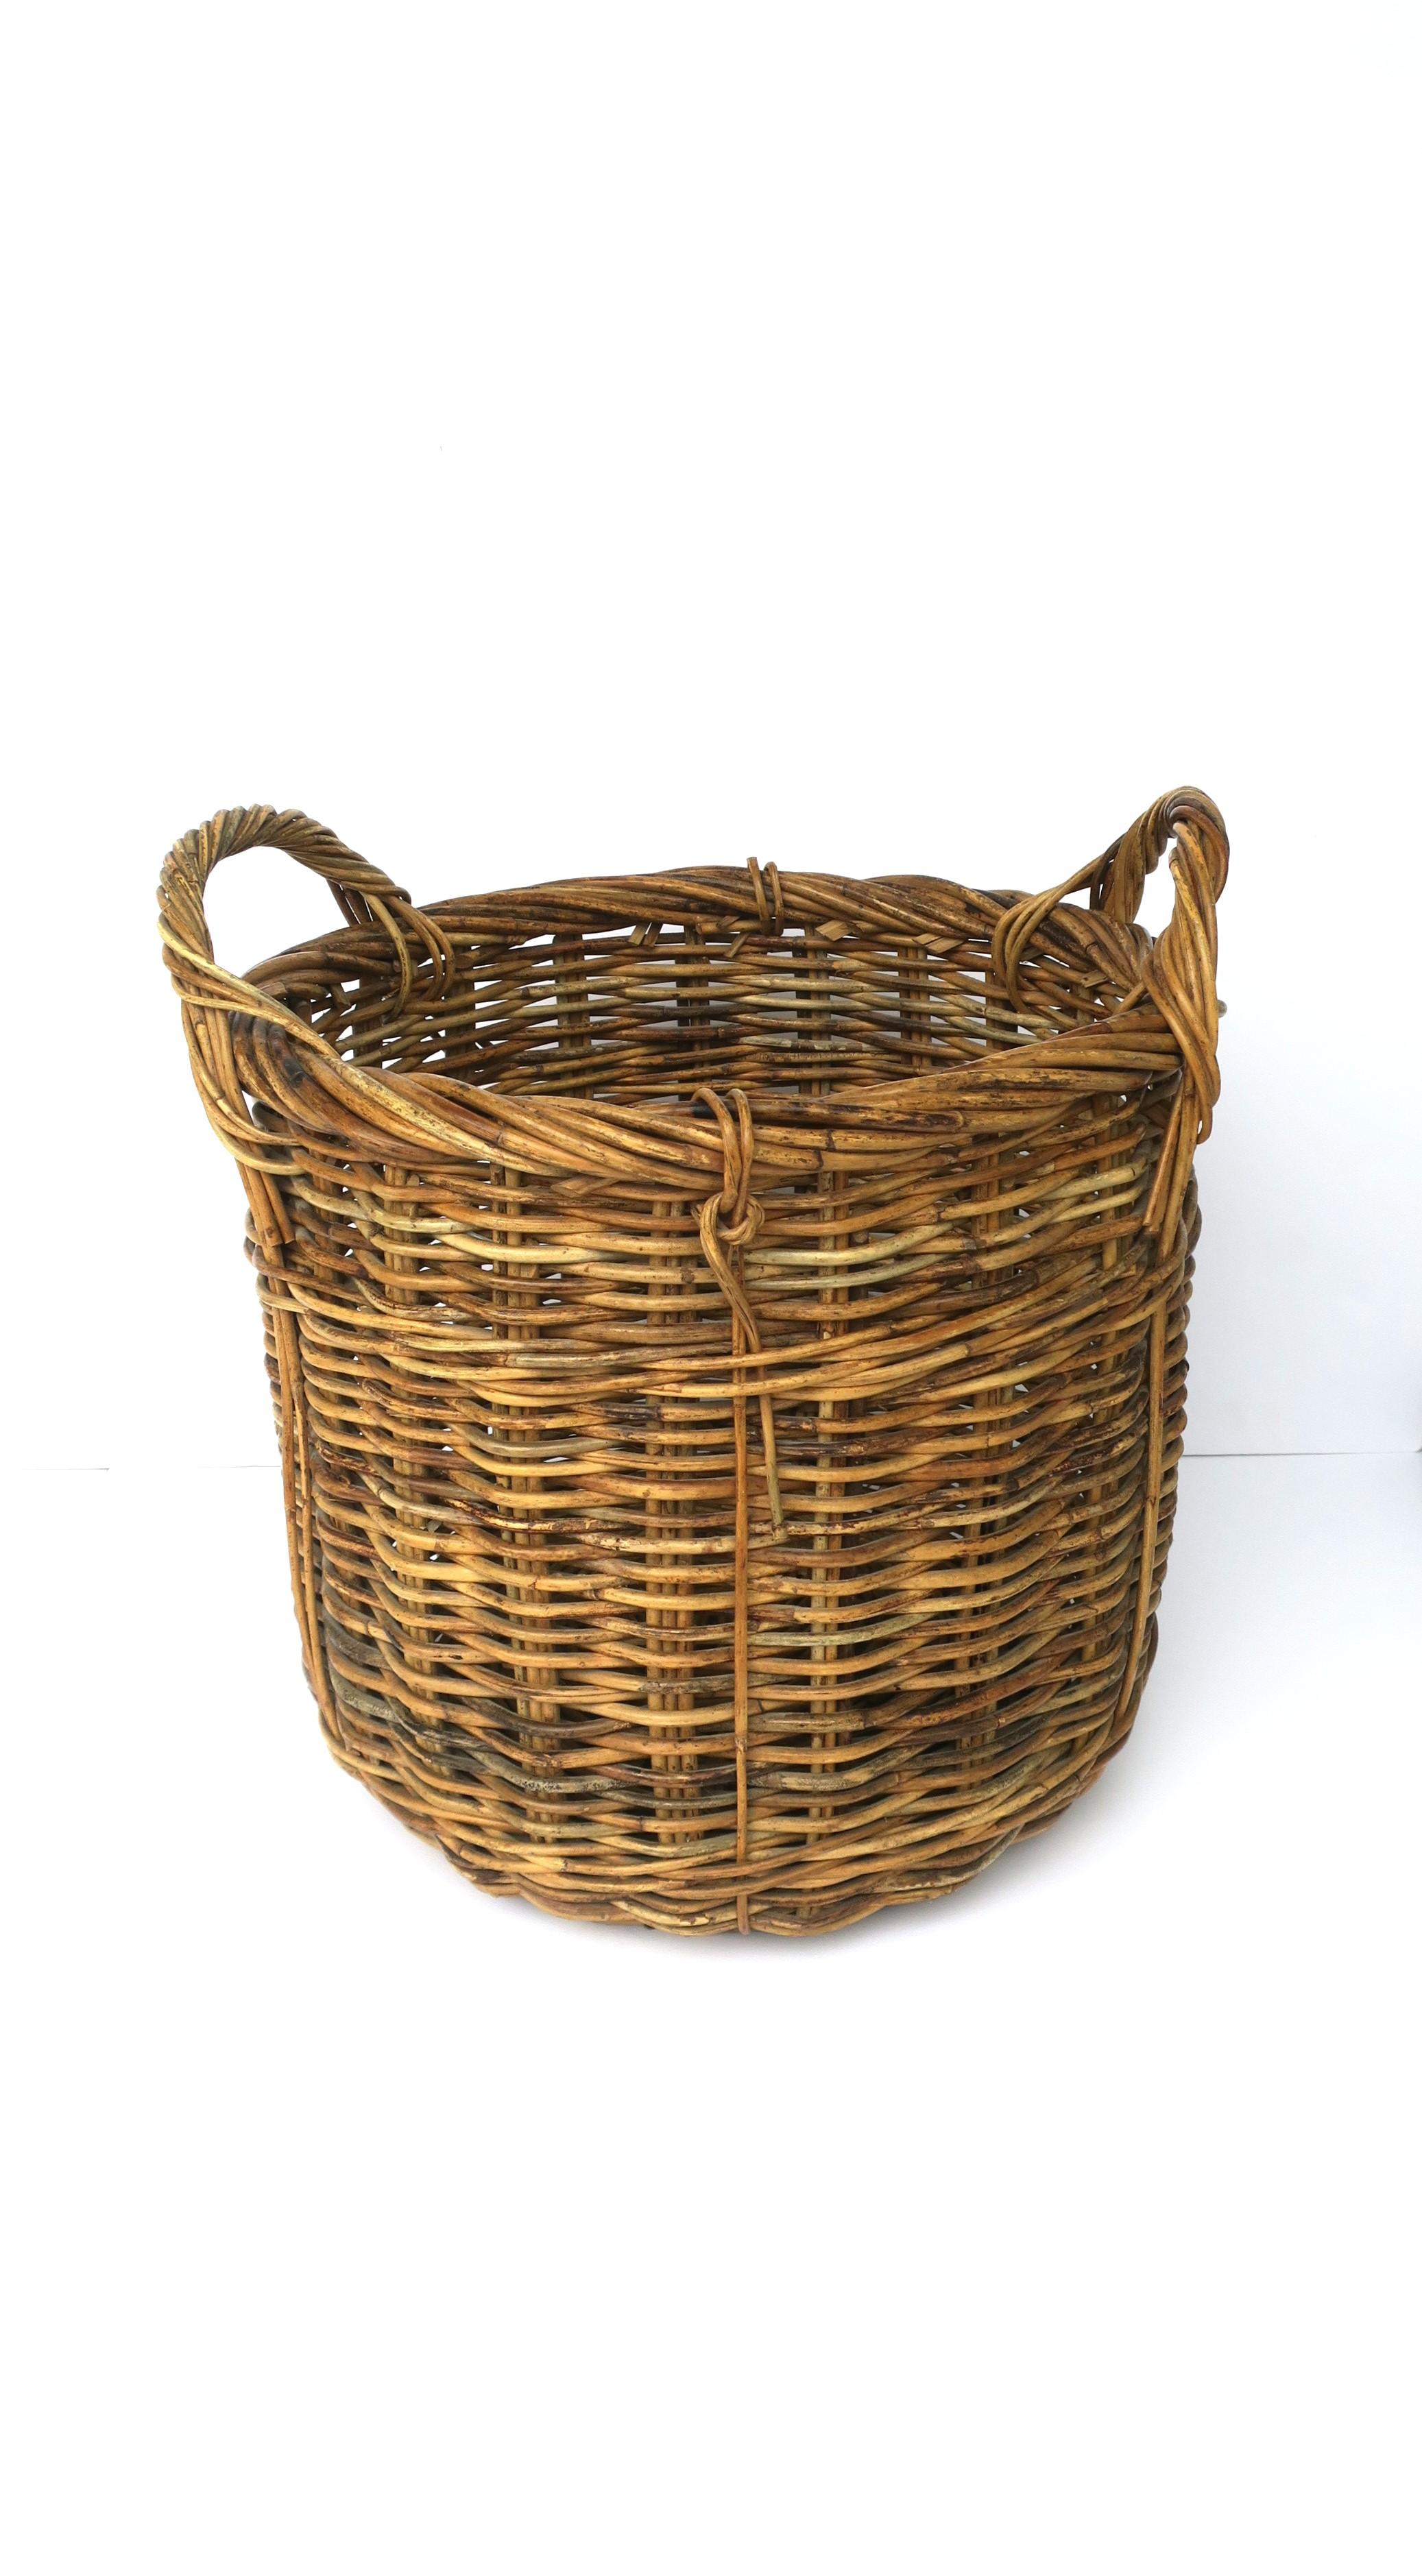 A well-made wicker basket with handles, circa mid to late-20th century. This wicker basket can be used as a plant potholder cachepot (as demonstrated), as a decorative piece, or to hold or store items, etc. Many uses. 

Overall dimensions: 17